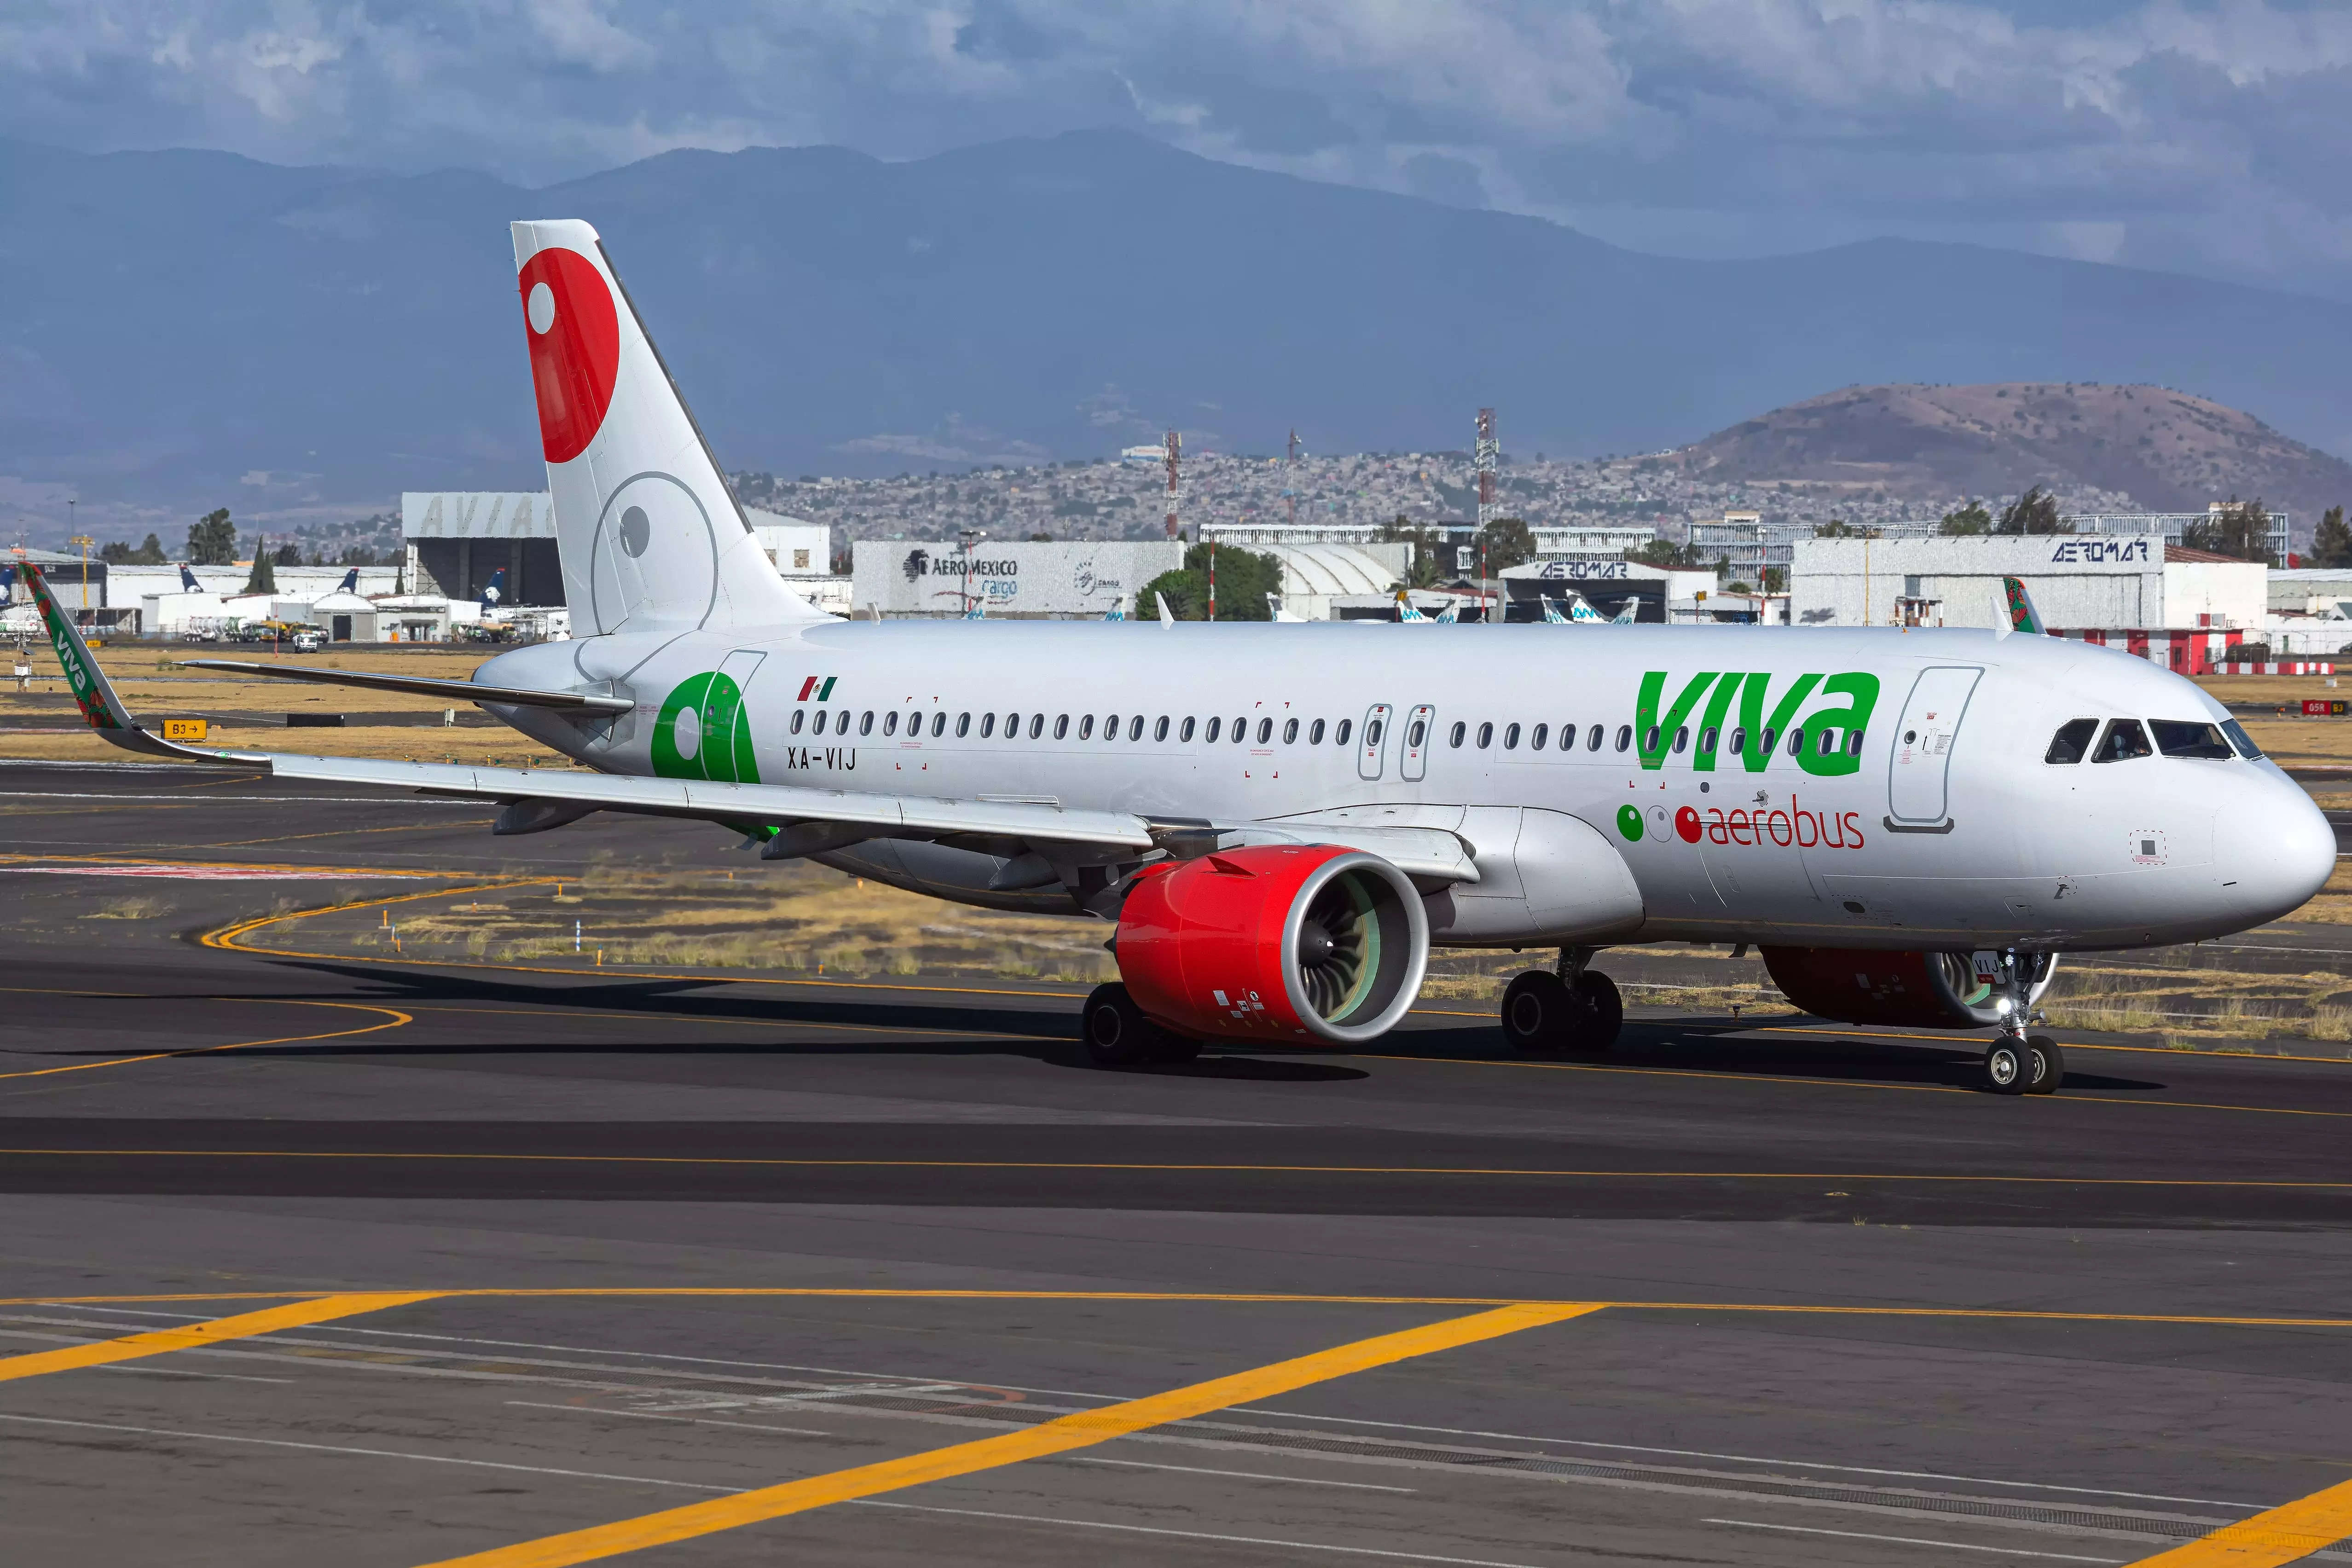 Viva Aerobus launches routes at new Mexico City airport amid airspace concerns